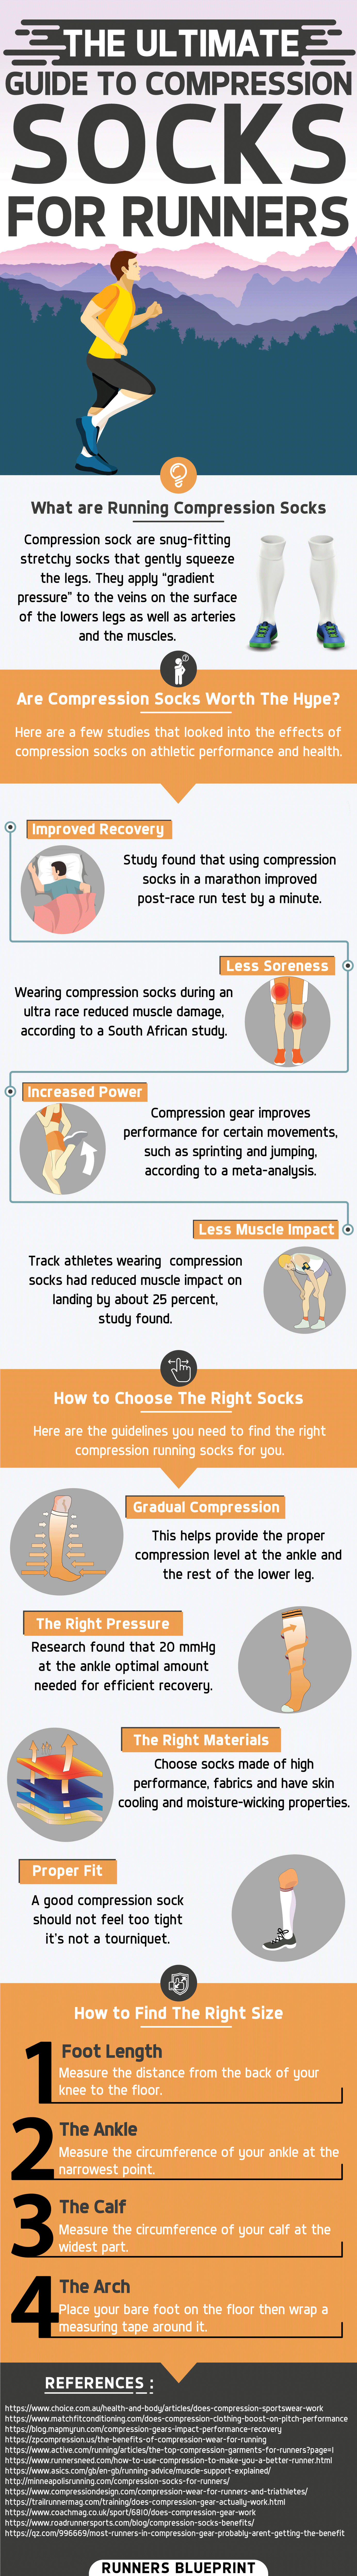 how to choose compression socks for running